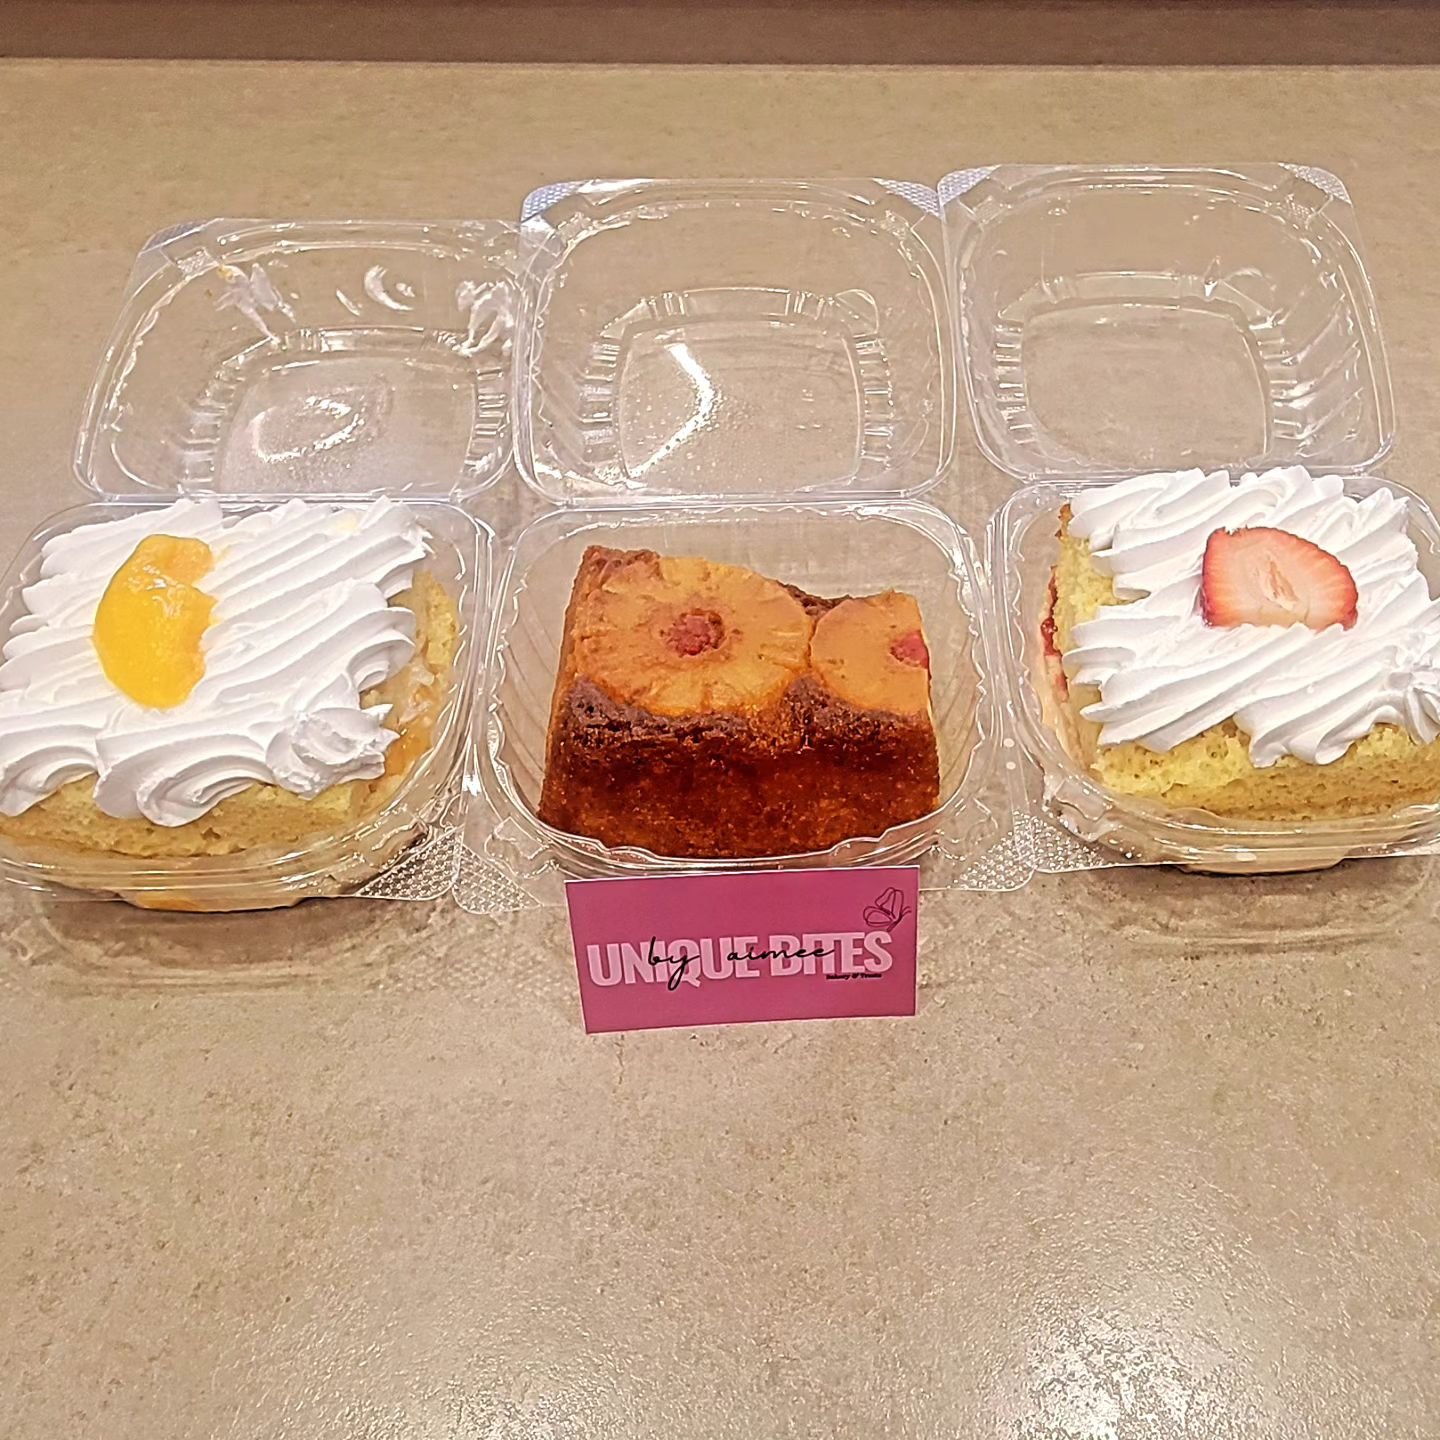 You won't want to miss this!  Limited time offer!!!! Come grab a delicious cake from @uniquebitesbyaimee_ here at Cafe 10:31! Pair perfectly with an iced New Orleans or a hot drip coffee. 

Peach Tres Leches
Pineapple Upside-down
Strawberry Tres Lech